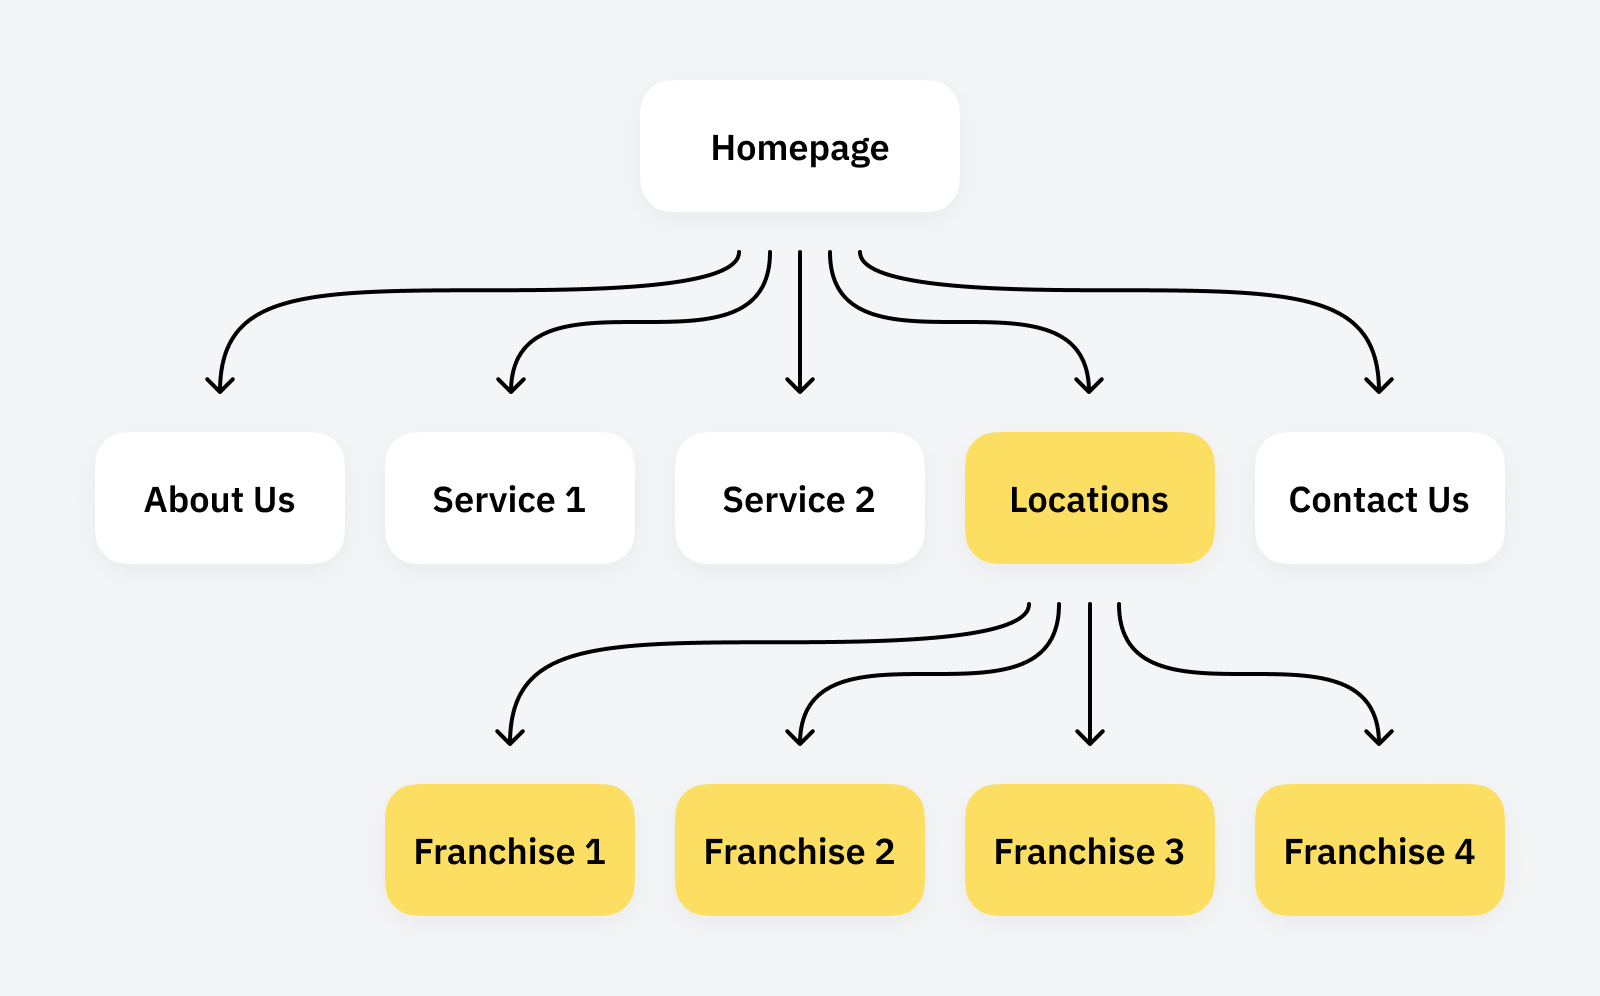 Example of a franchise' site structure with each franchisee having only a single page